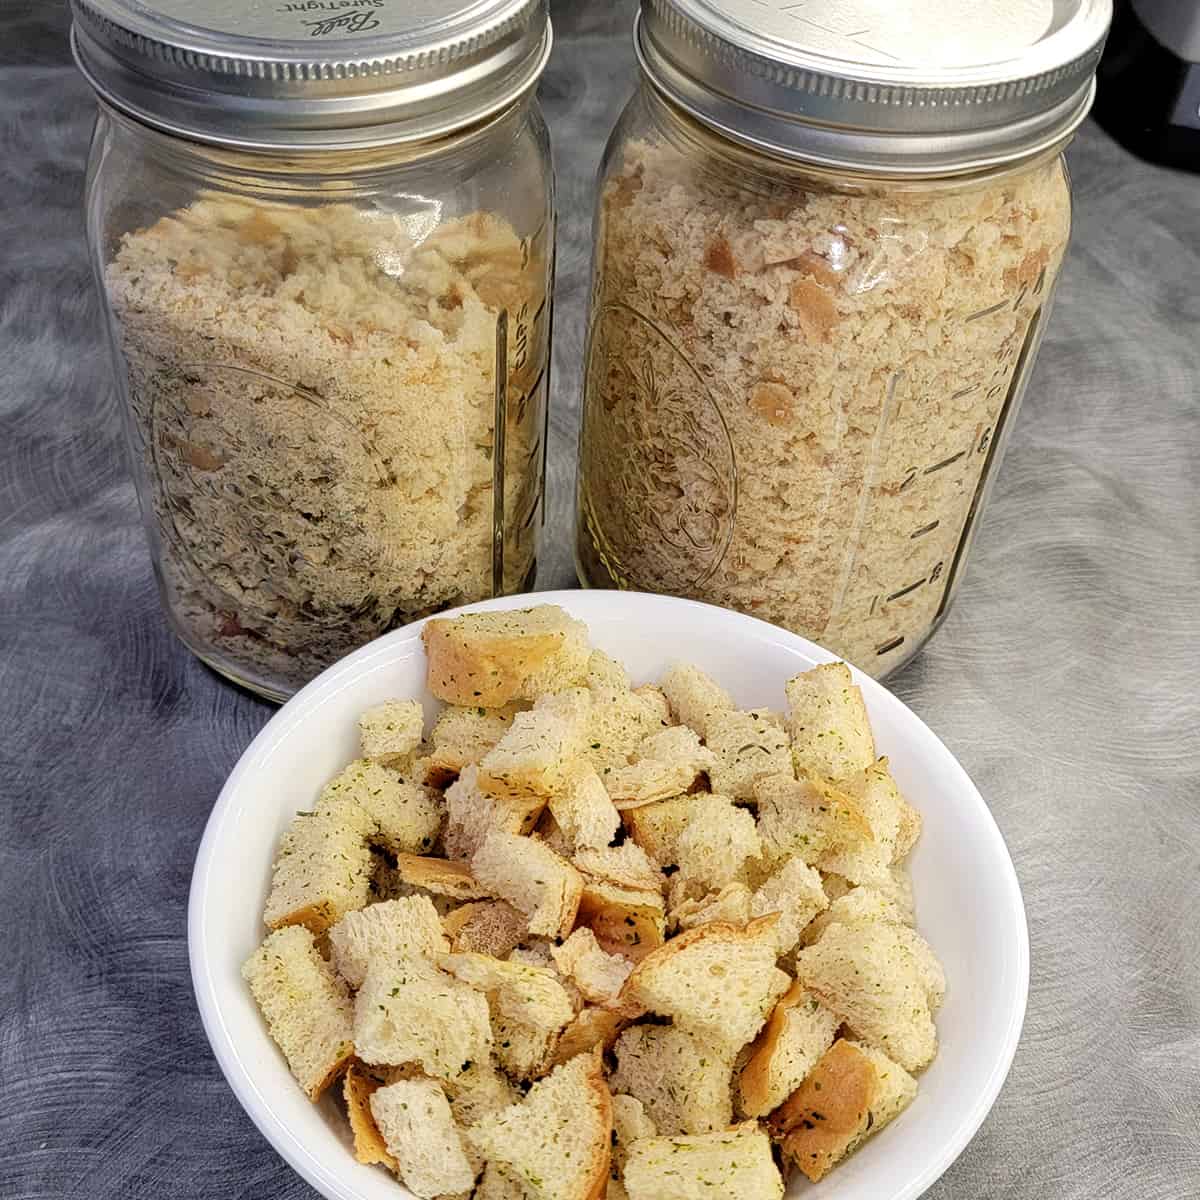 DIY Bread Crumbs & Croutons with a Dehydrator